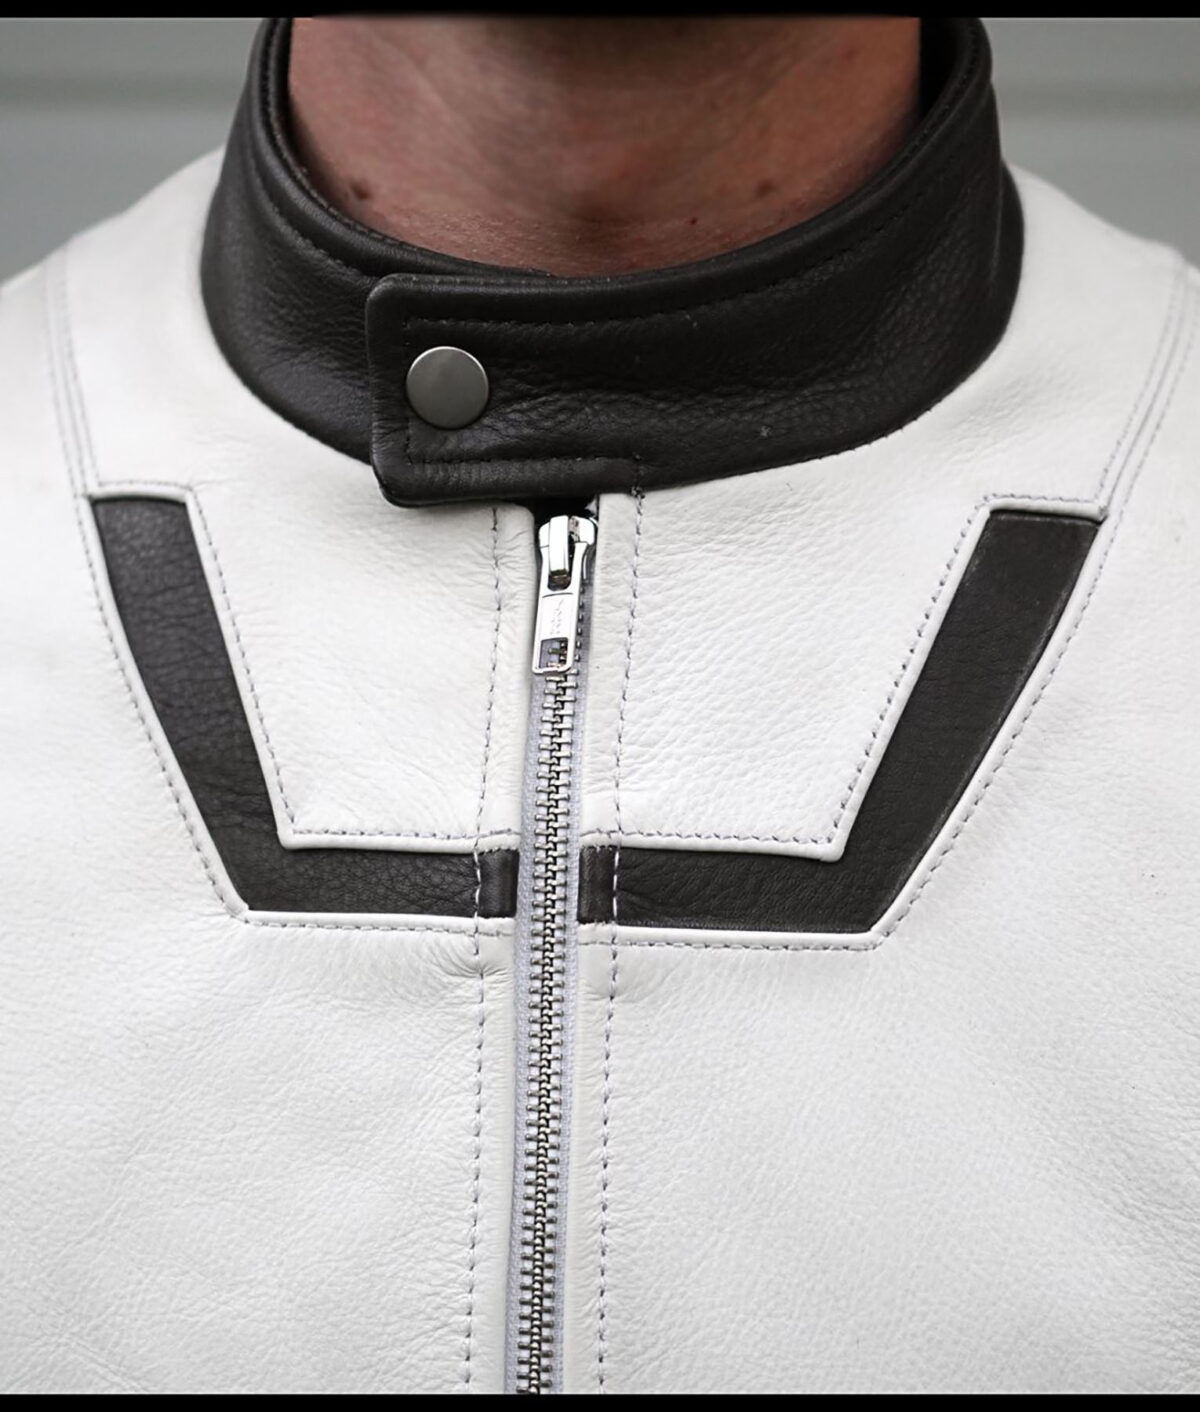 SpaceX Dragon Inspired Jacket